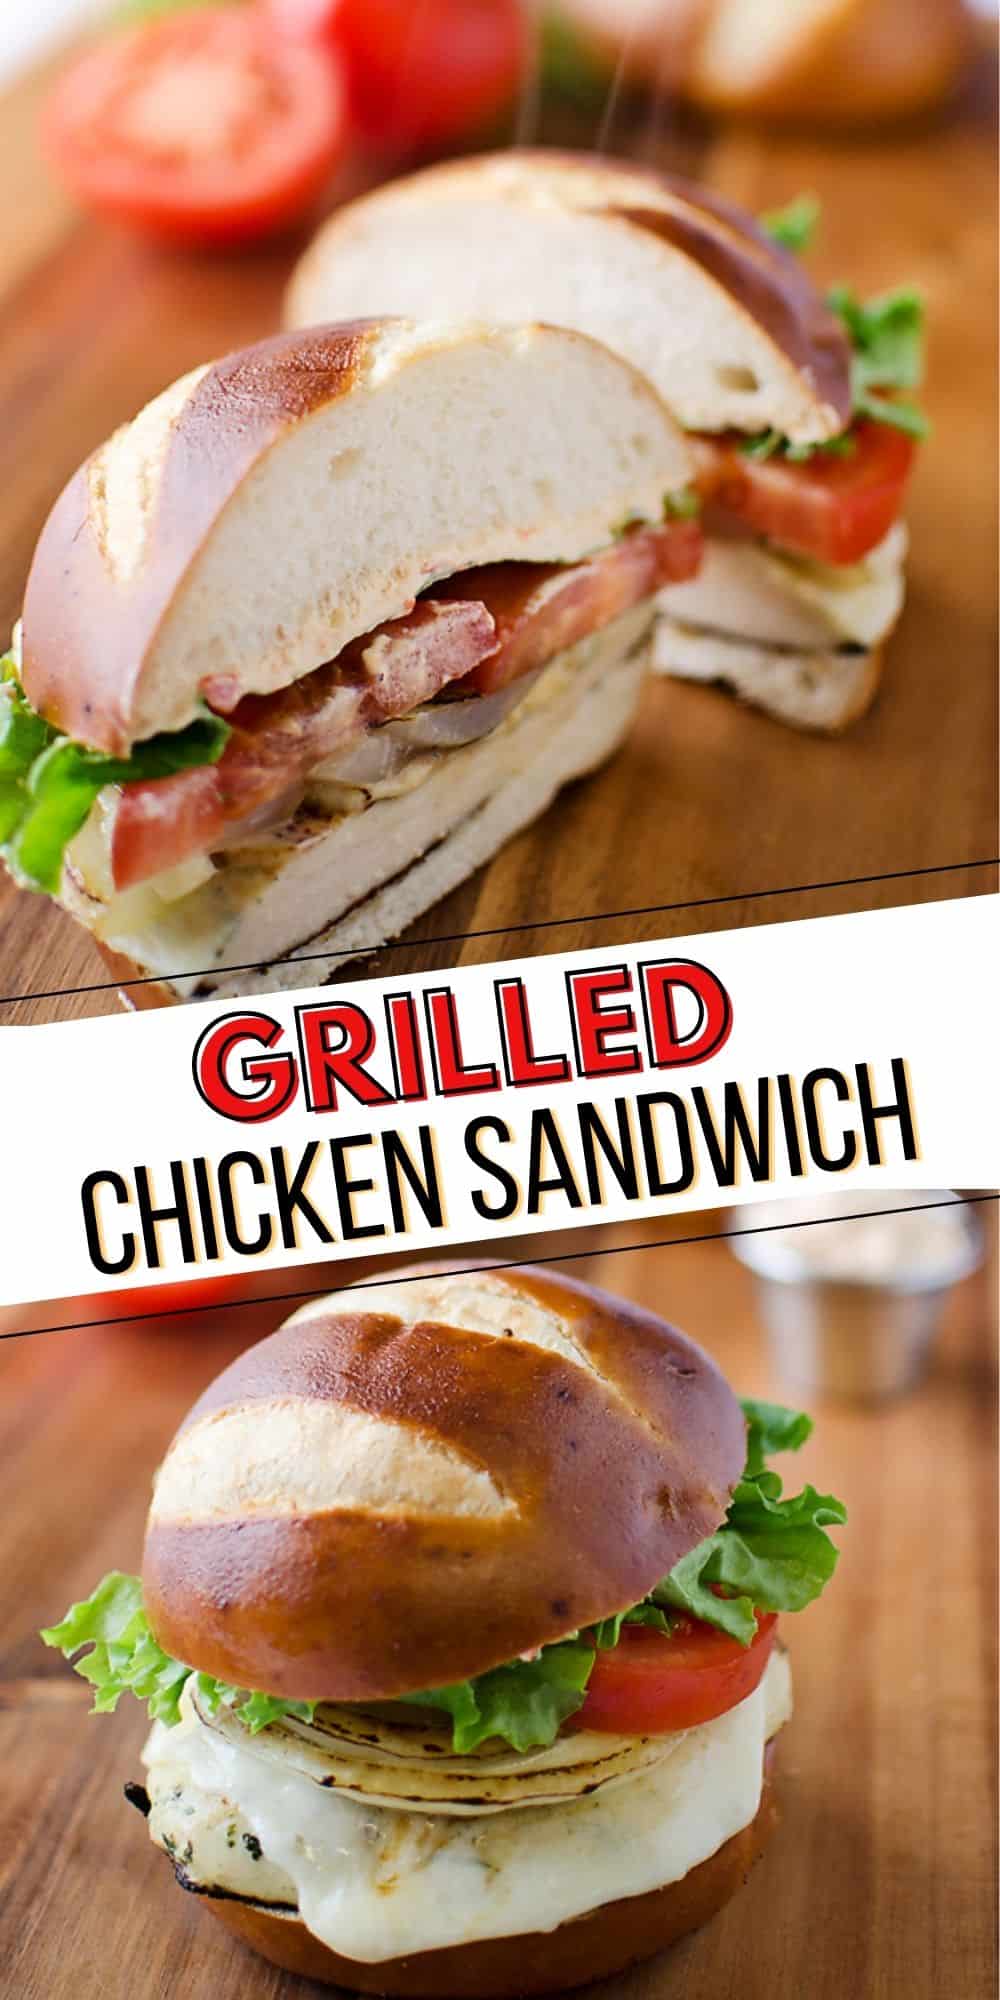 Roasted Red Pepper & Provolone Grilled Chicken Sandwich